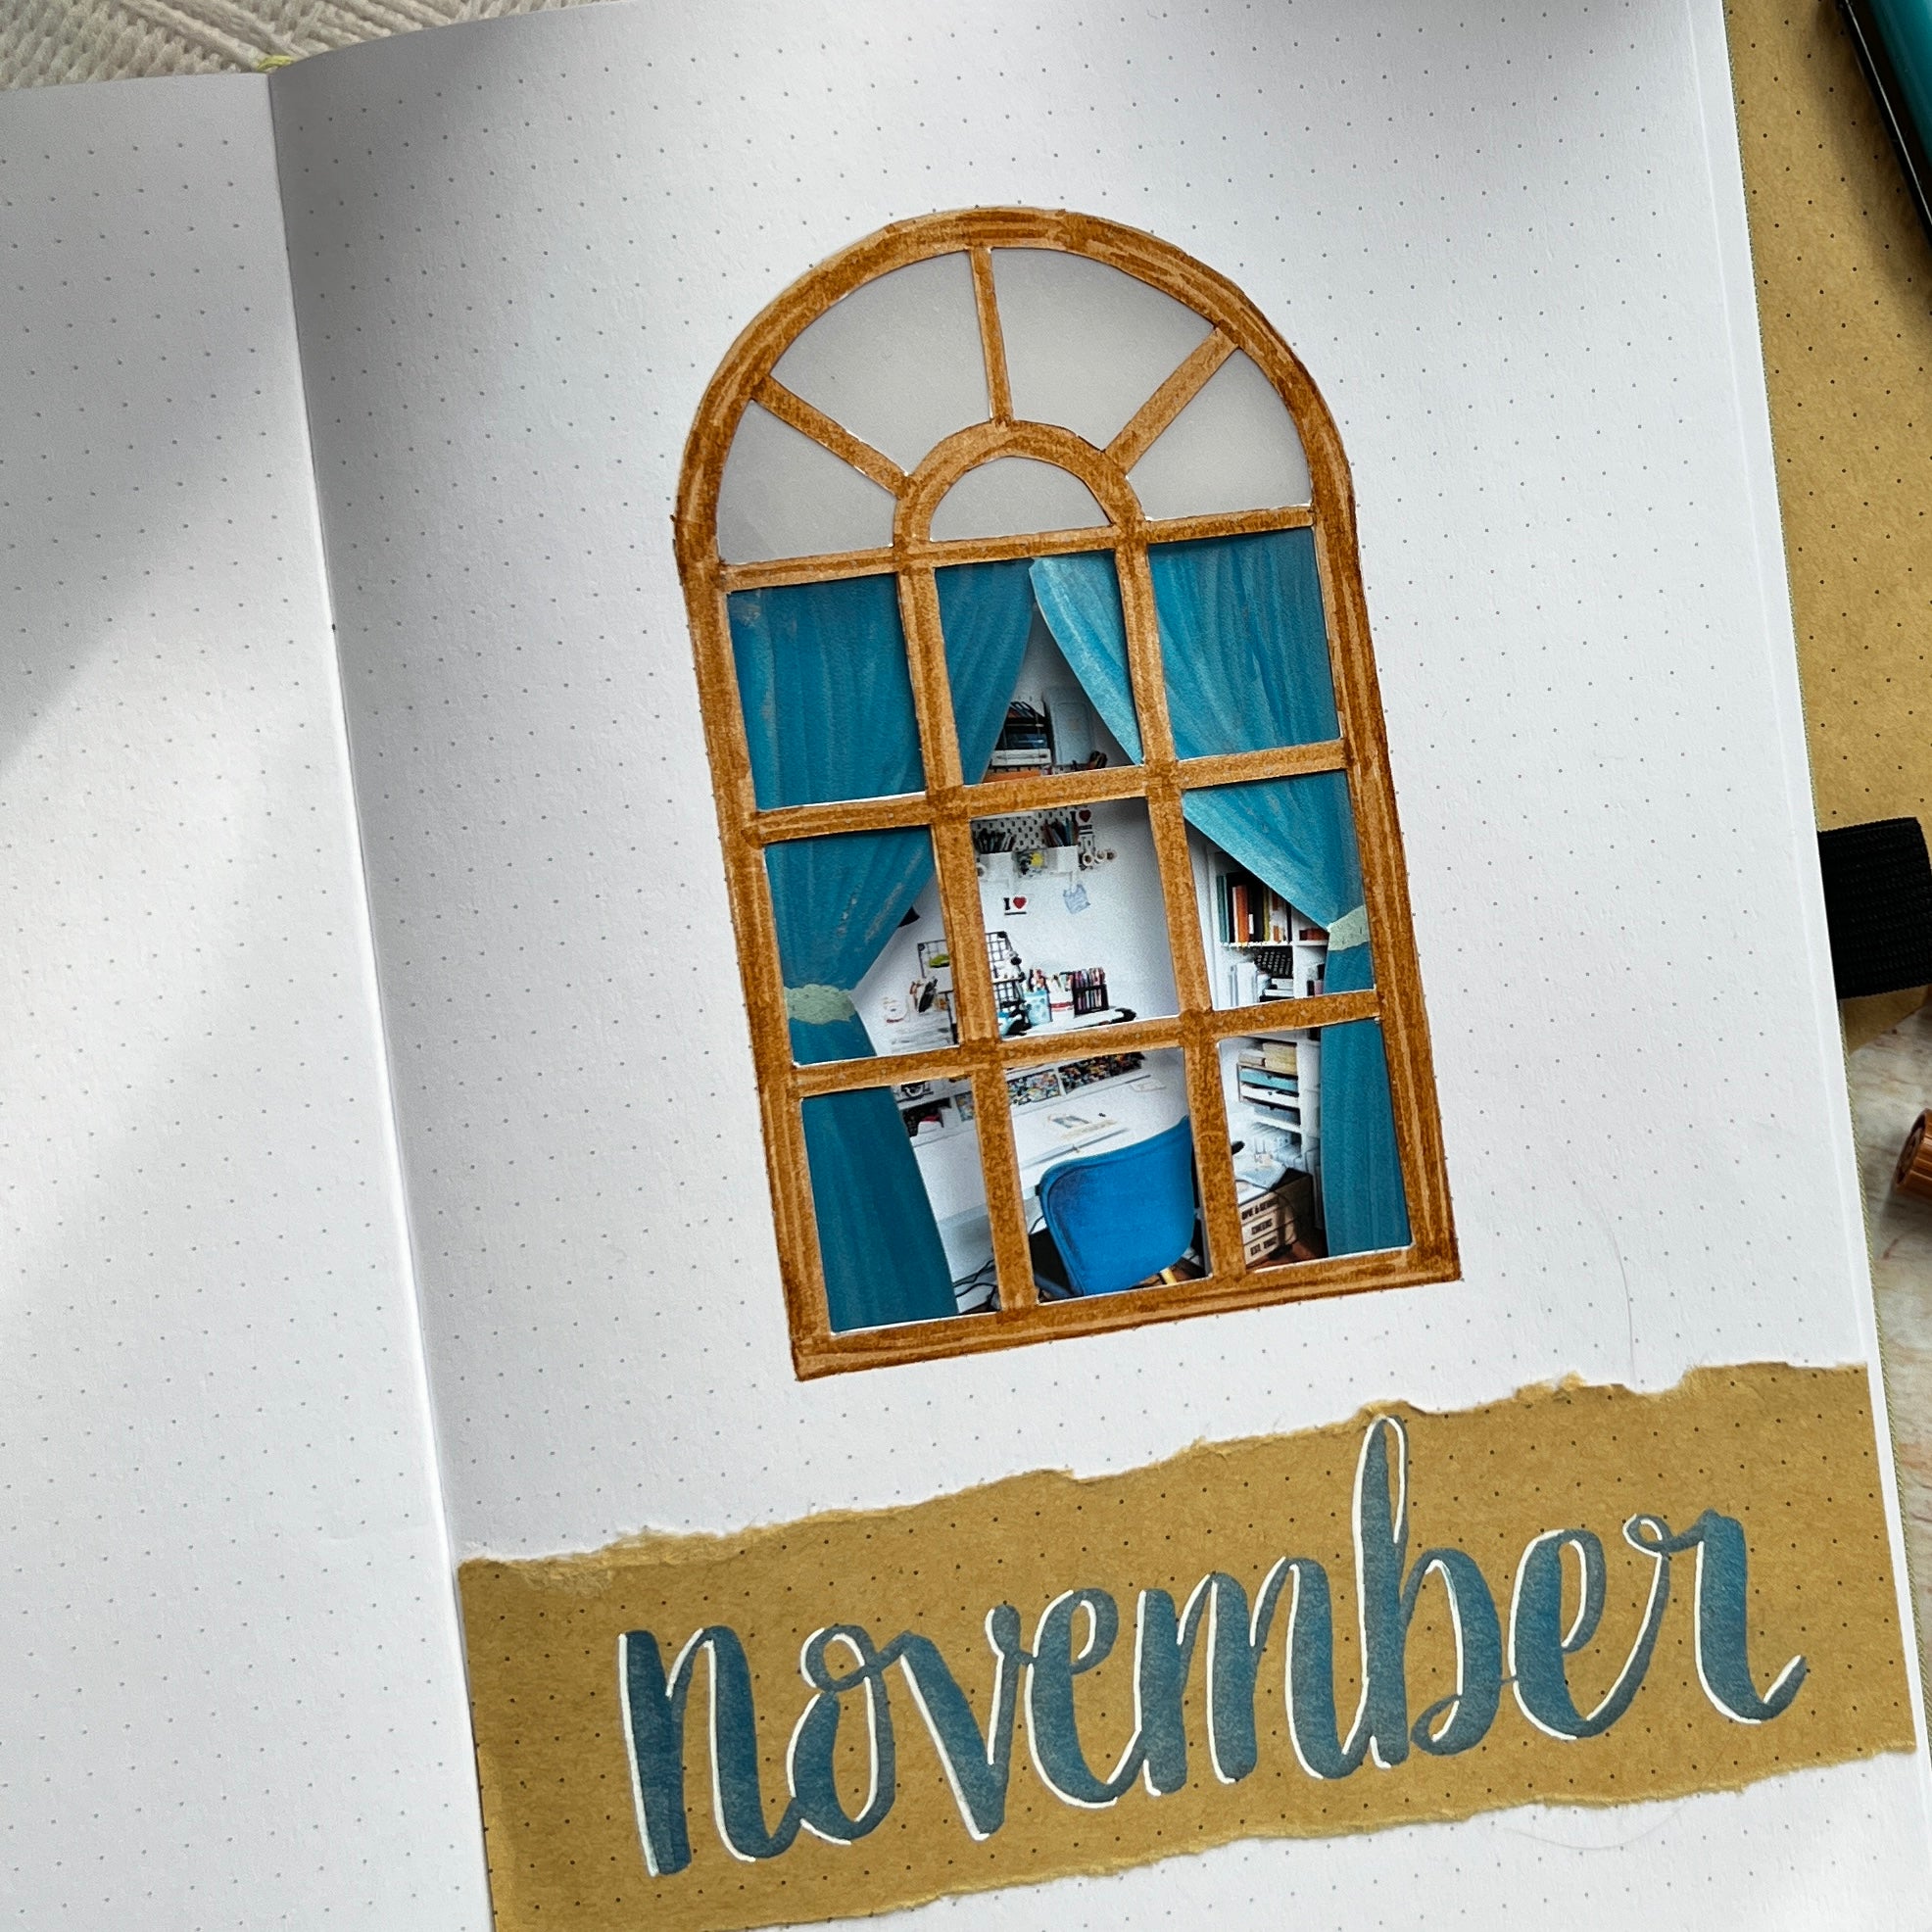 November cover page of window onto a photo of desk area